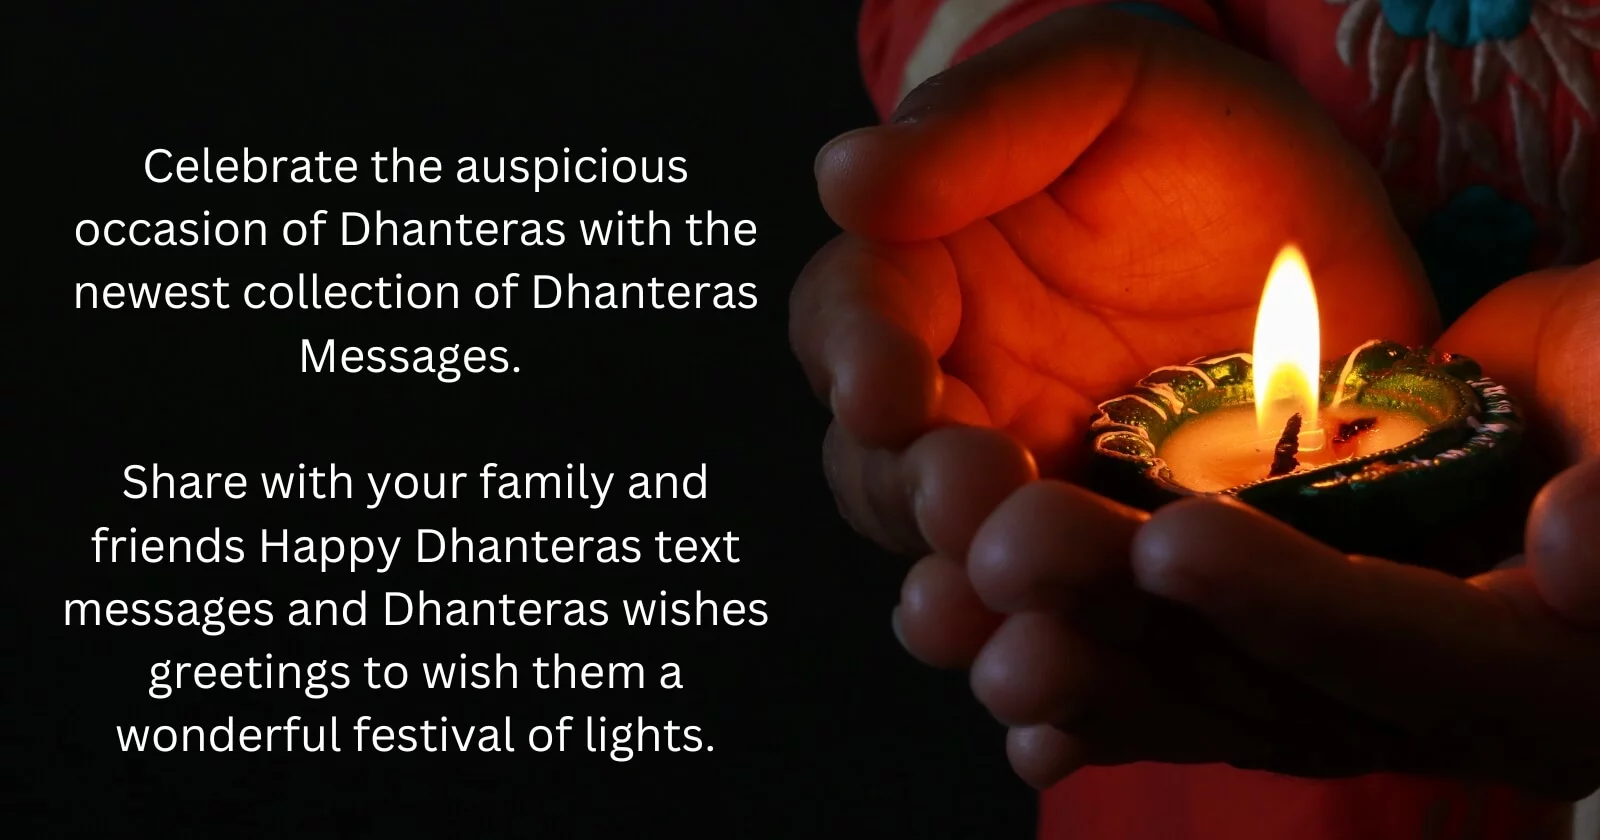 Dhanteras images for facebook